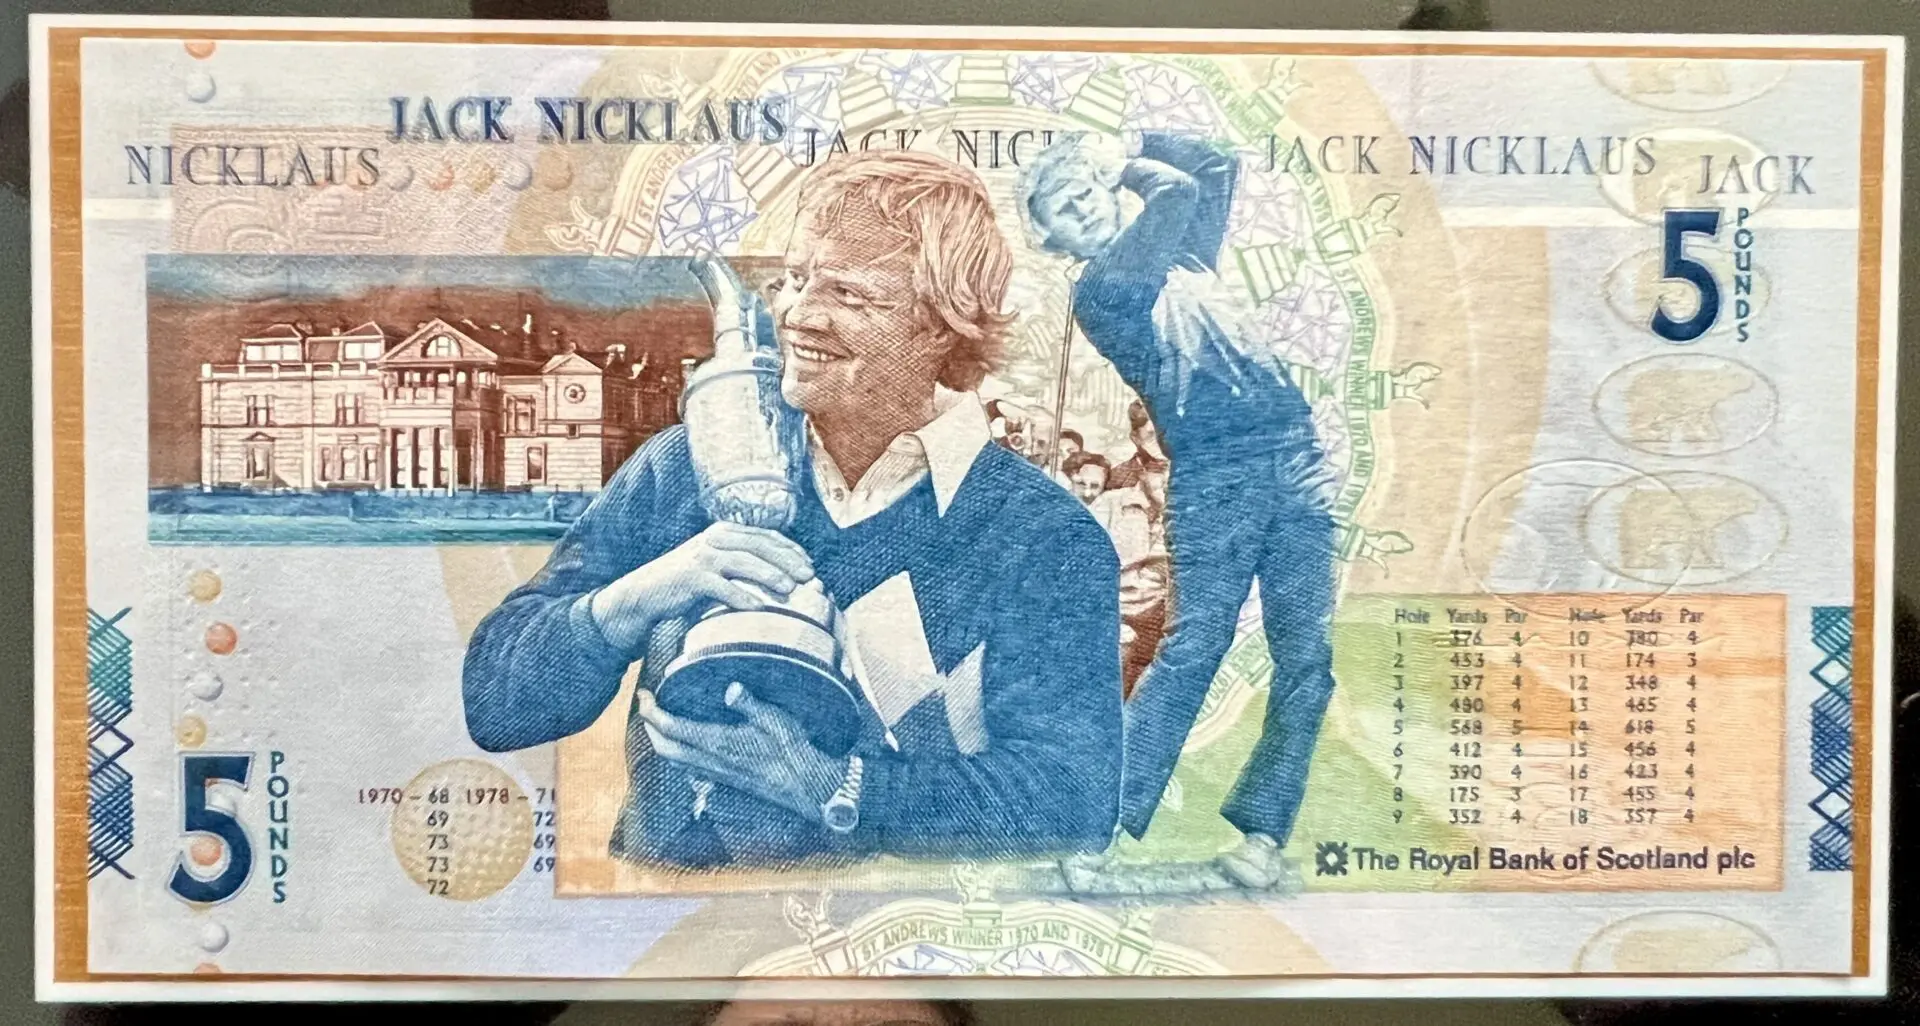 A close up of the back side of a jack nicklaus golf card